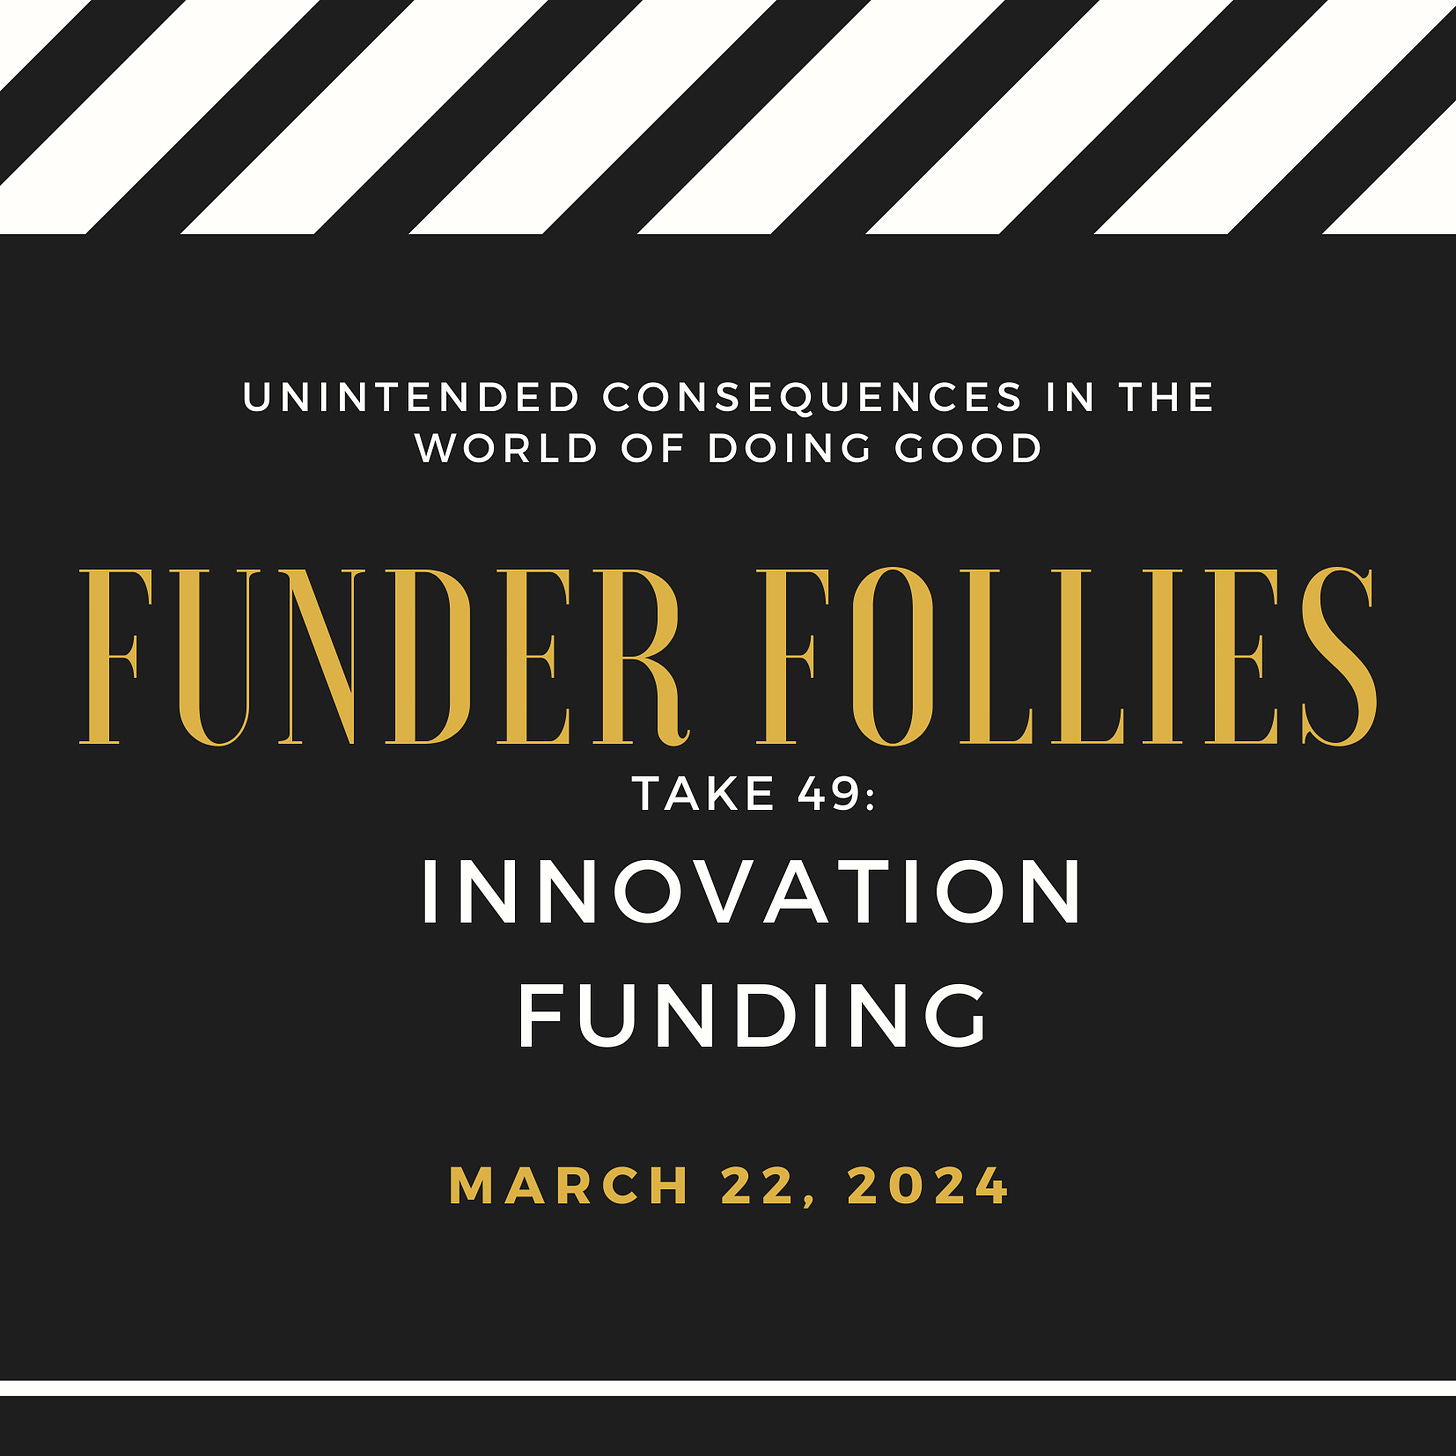 black and white film clapper board showing Funder Follies, Unintended Consequences of Doing Good, Take # 49, Innovation Funding, March 22, 2024